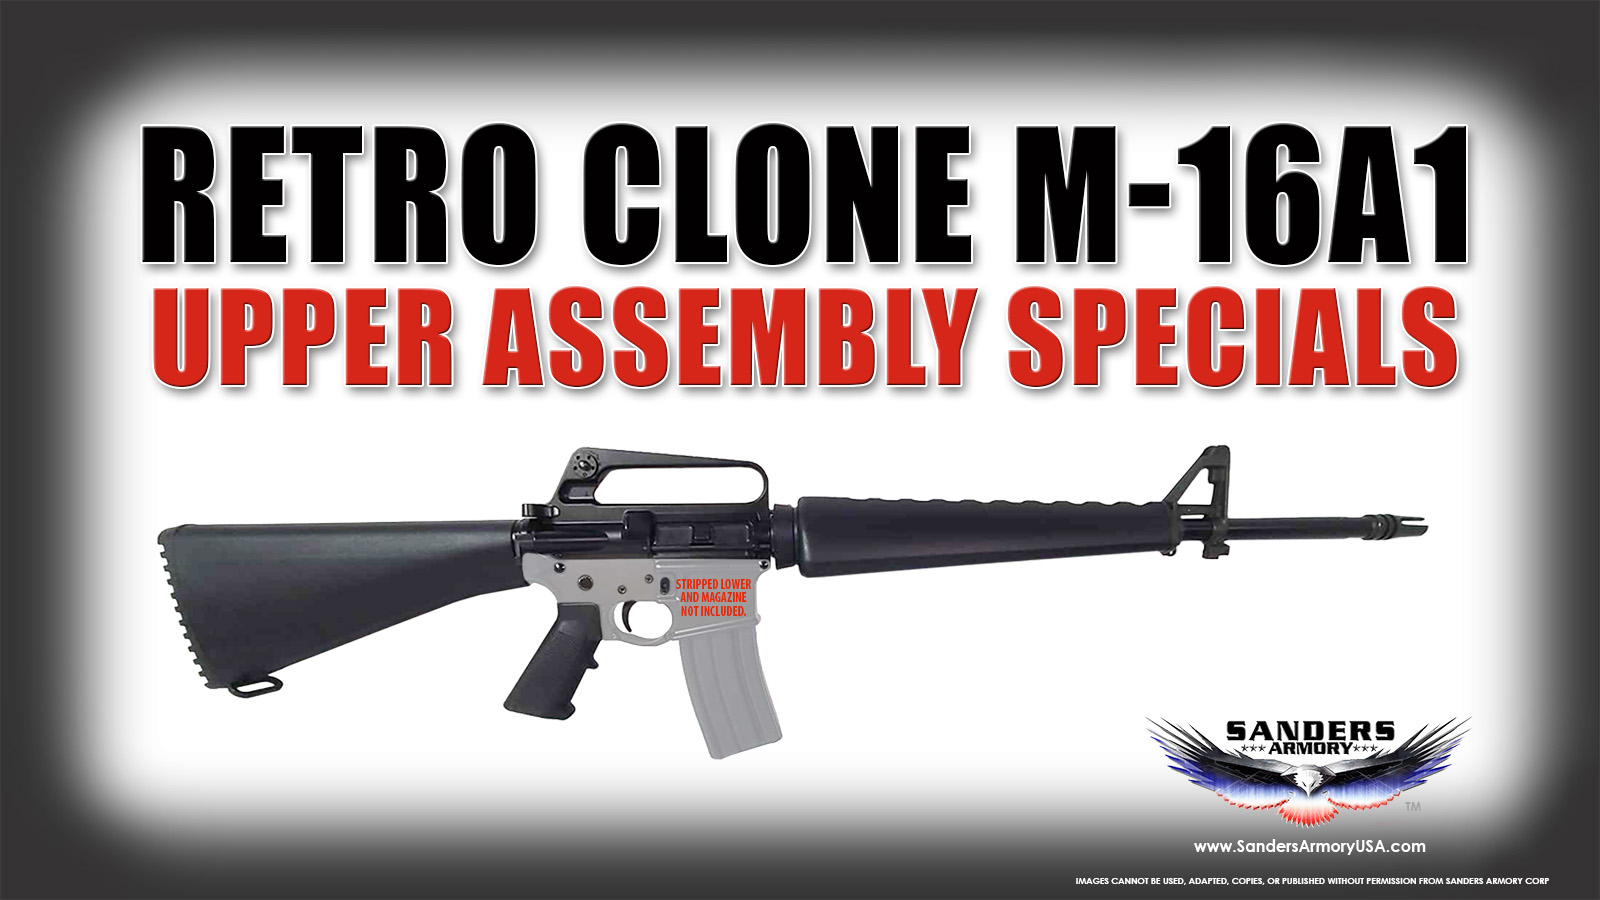 Sanders Armory M-16A1 Specials